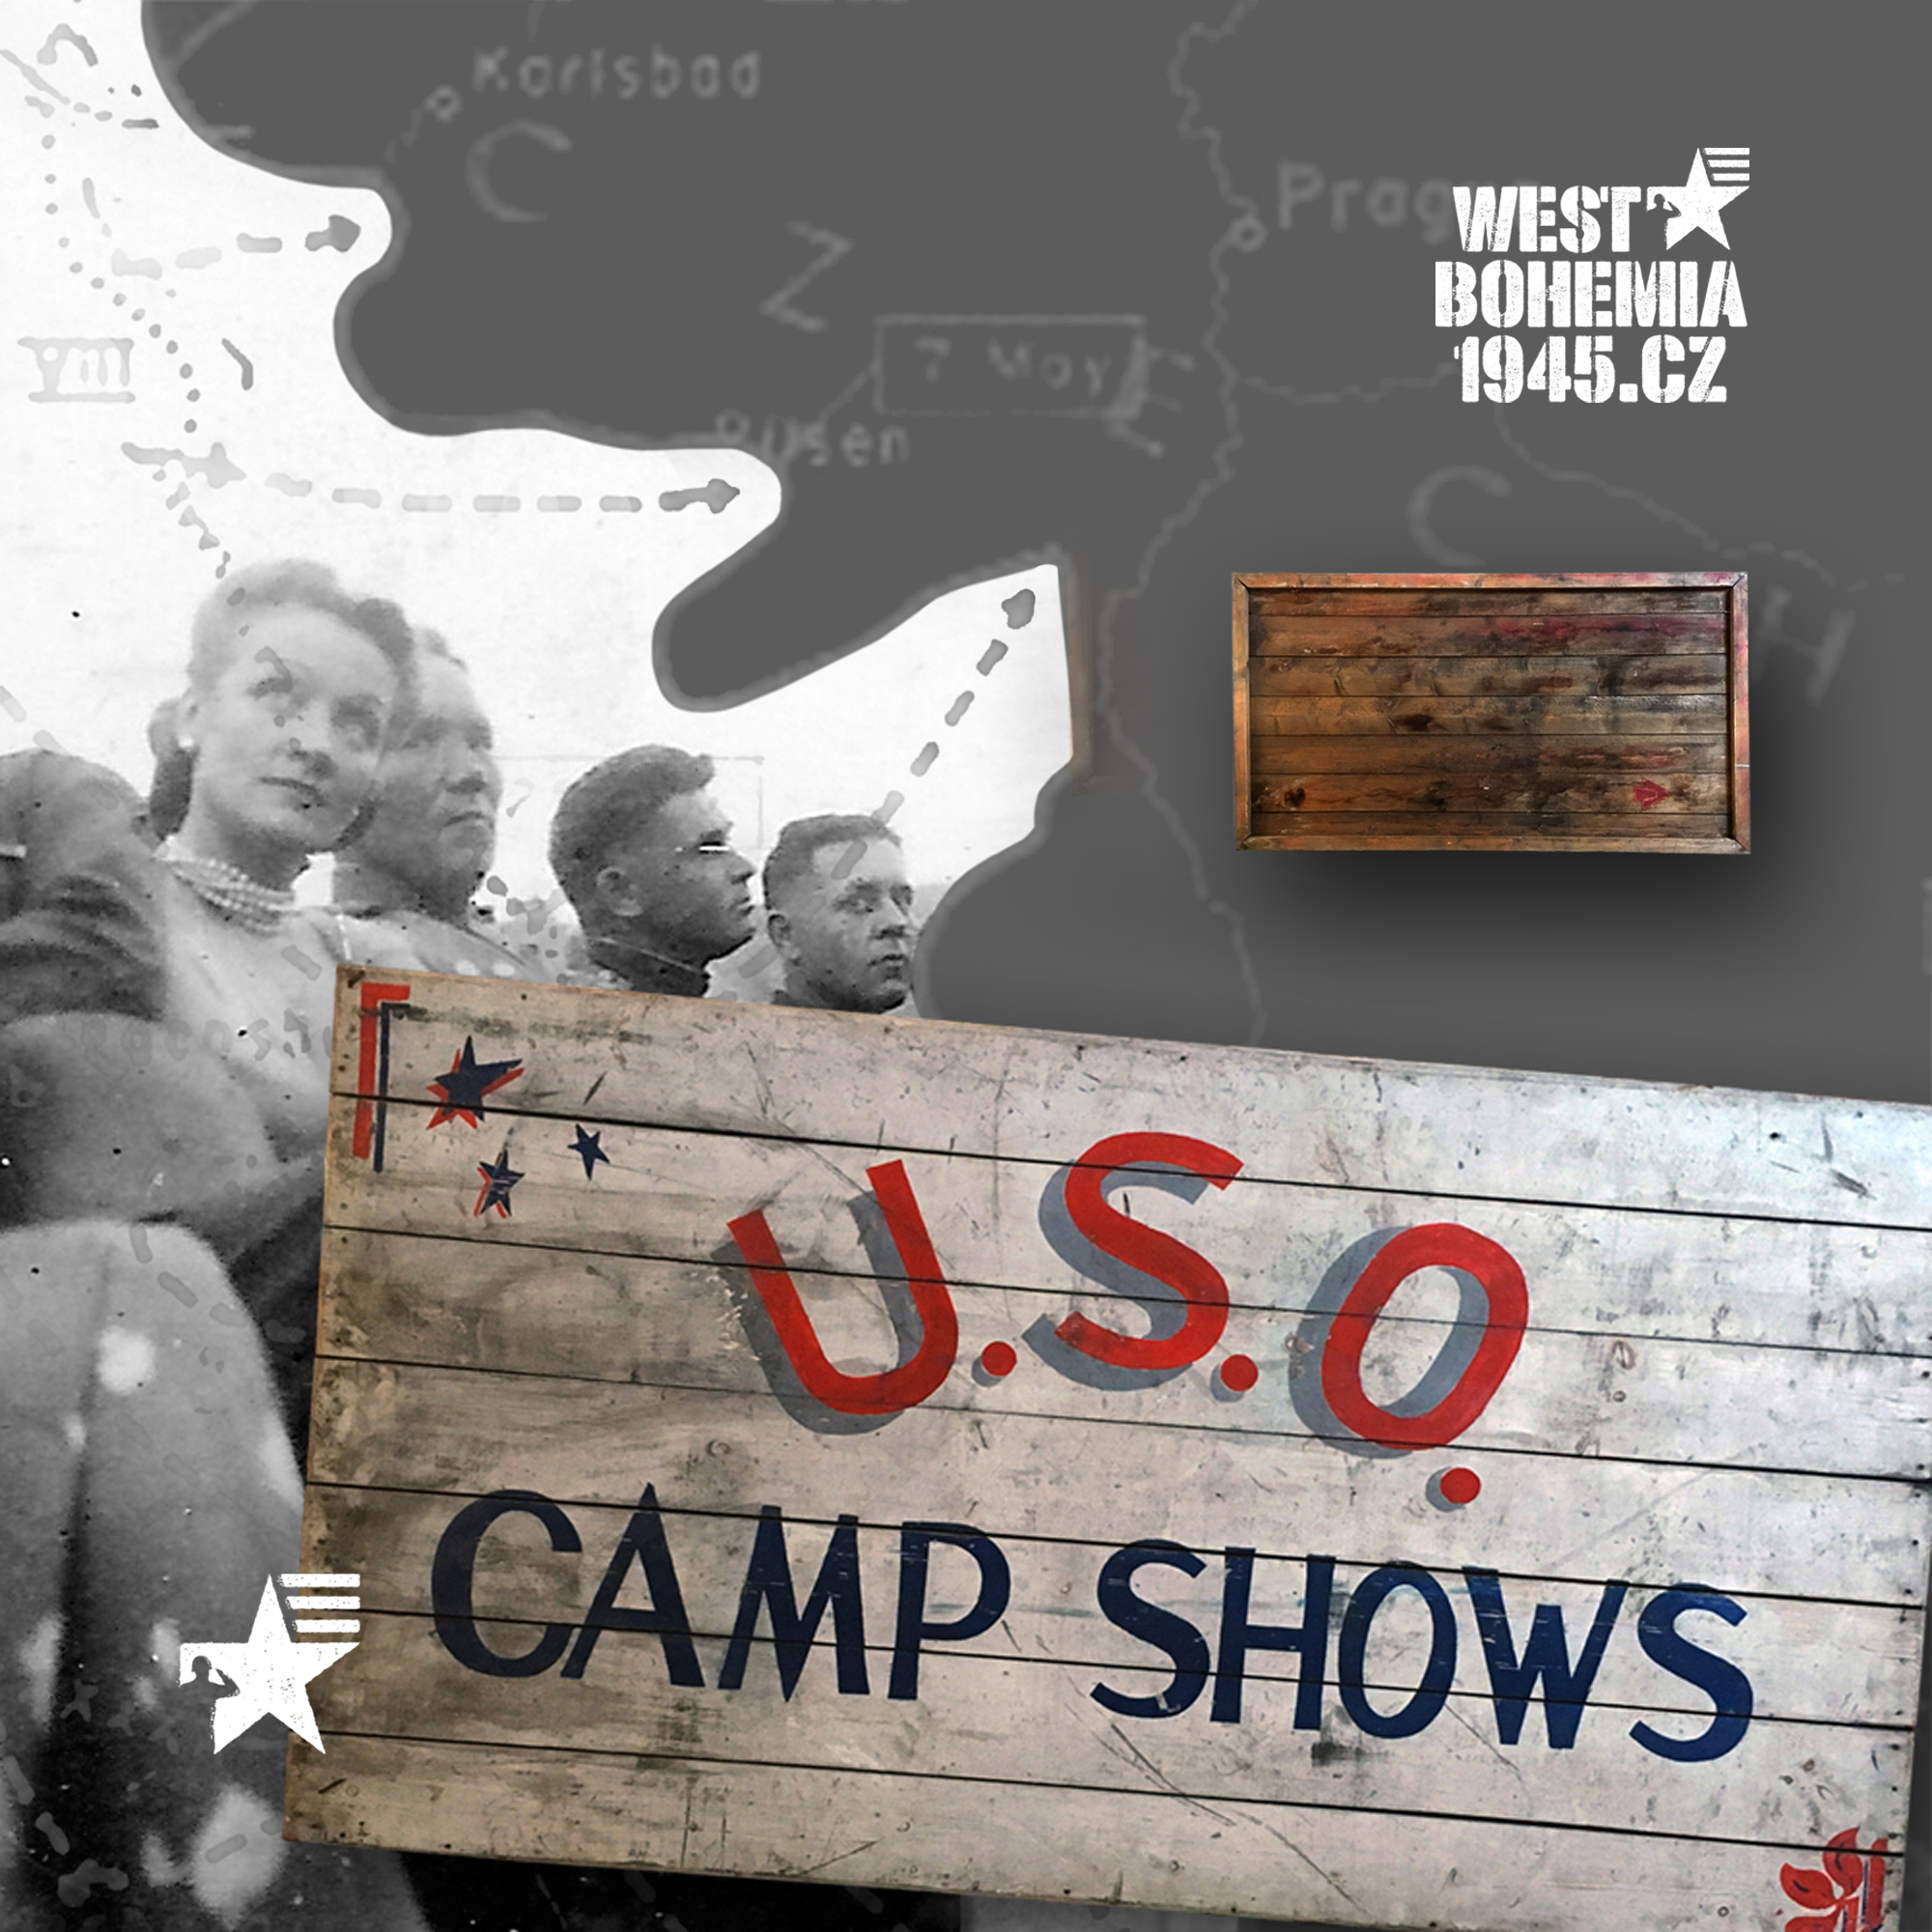 WB10002 WWII US ARMY WOODEN TABLE PAINTED U.S.O. CAMP SHOWS US XXII CORPS IN CZECHOSLOVAKIA 1945